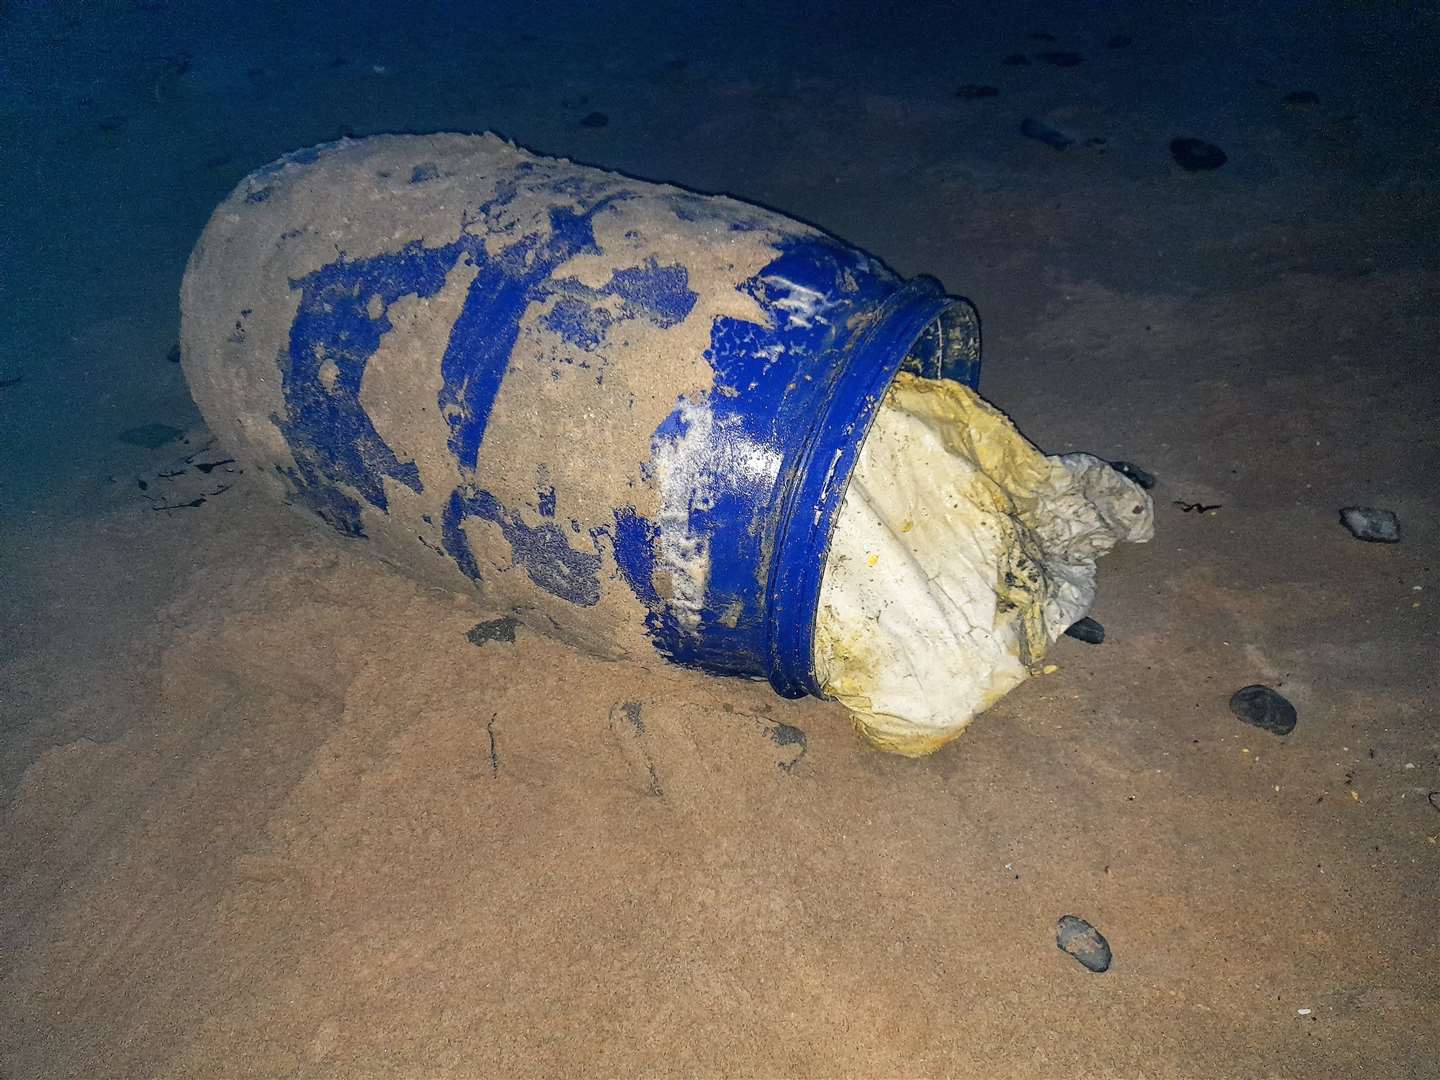 The barrel with its contents exposed at Dunnet beach when initially discovered in January this year.